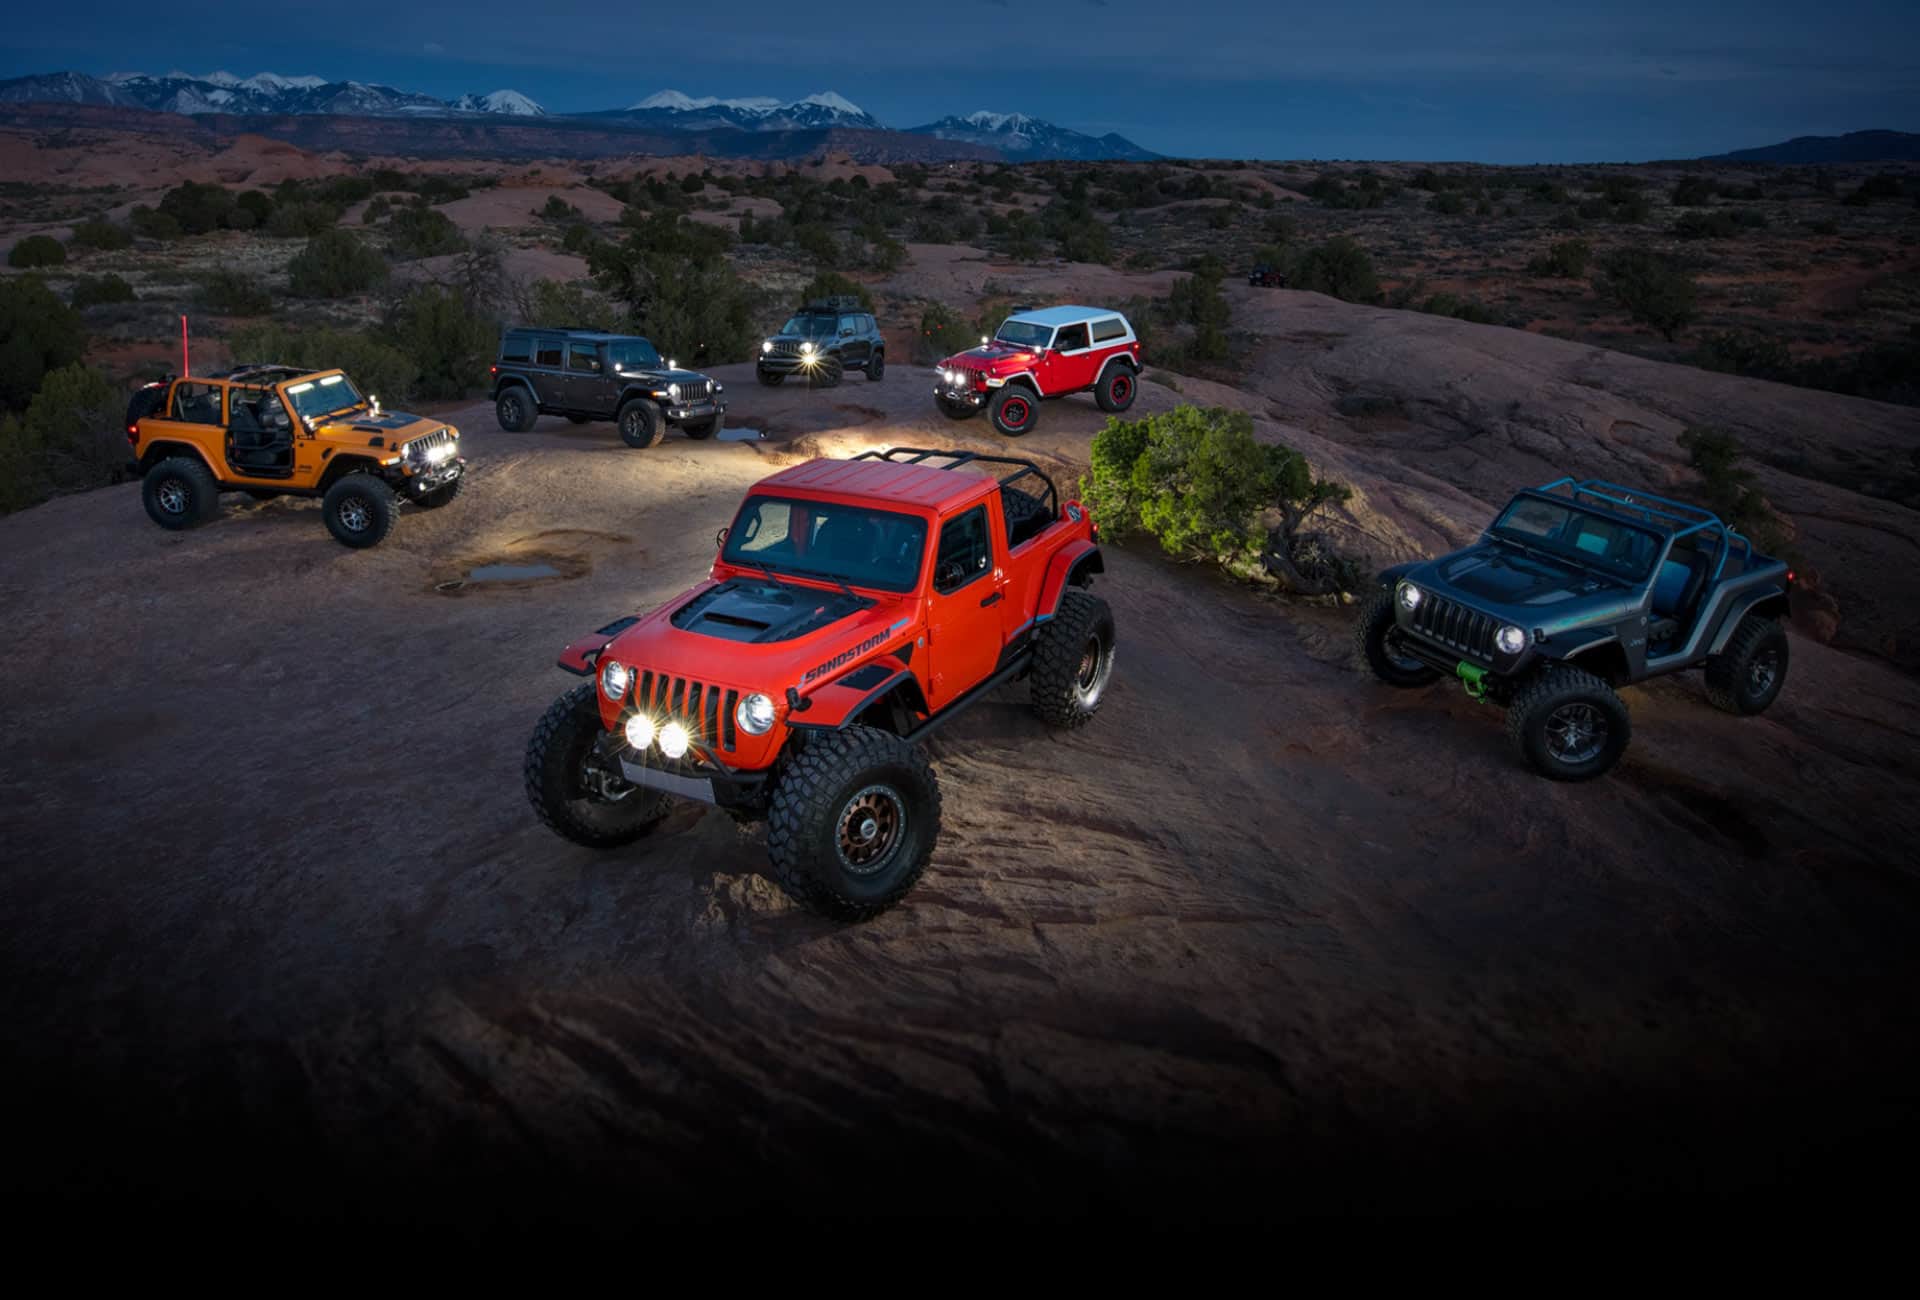 A set of six Jeep Brand Concept vehicles parked on a hill in the desert at night.